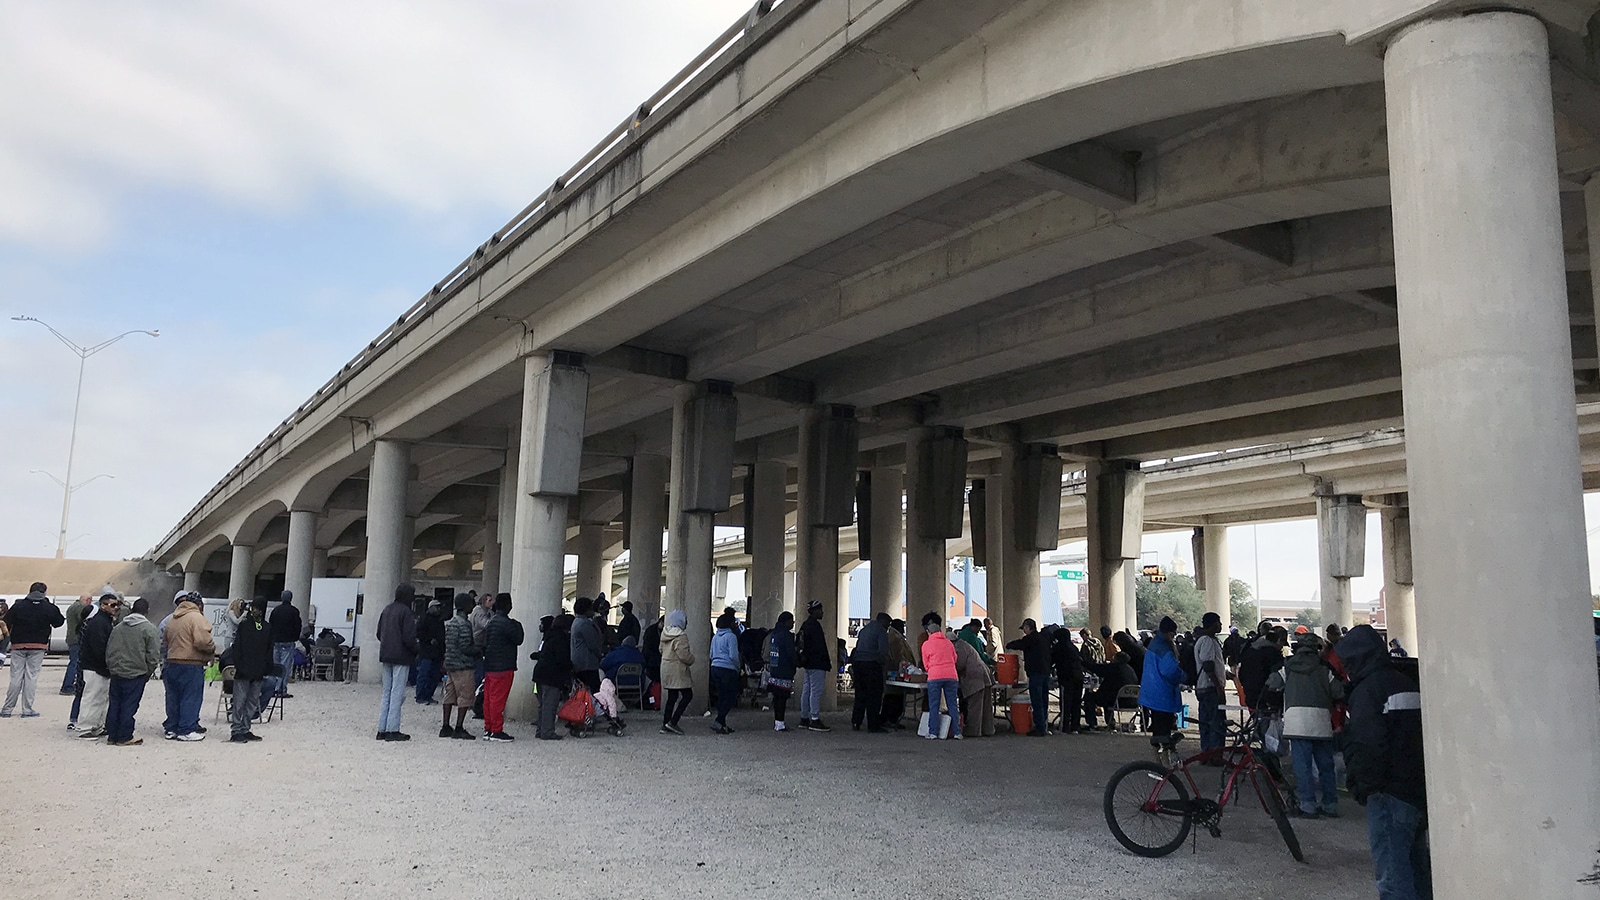 A crowd lines up for bowls of stew and other food options before worship at Church Under the Bridge in Waco, Texas, on Nov. 18, 2018. RNS photo by Bobby Ross Jr.